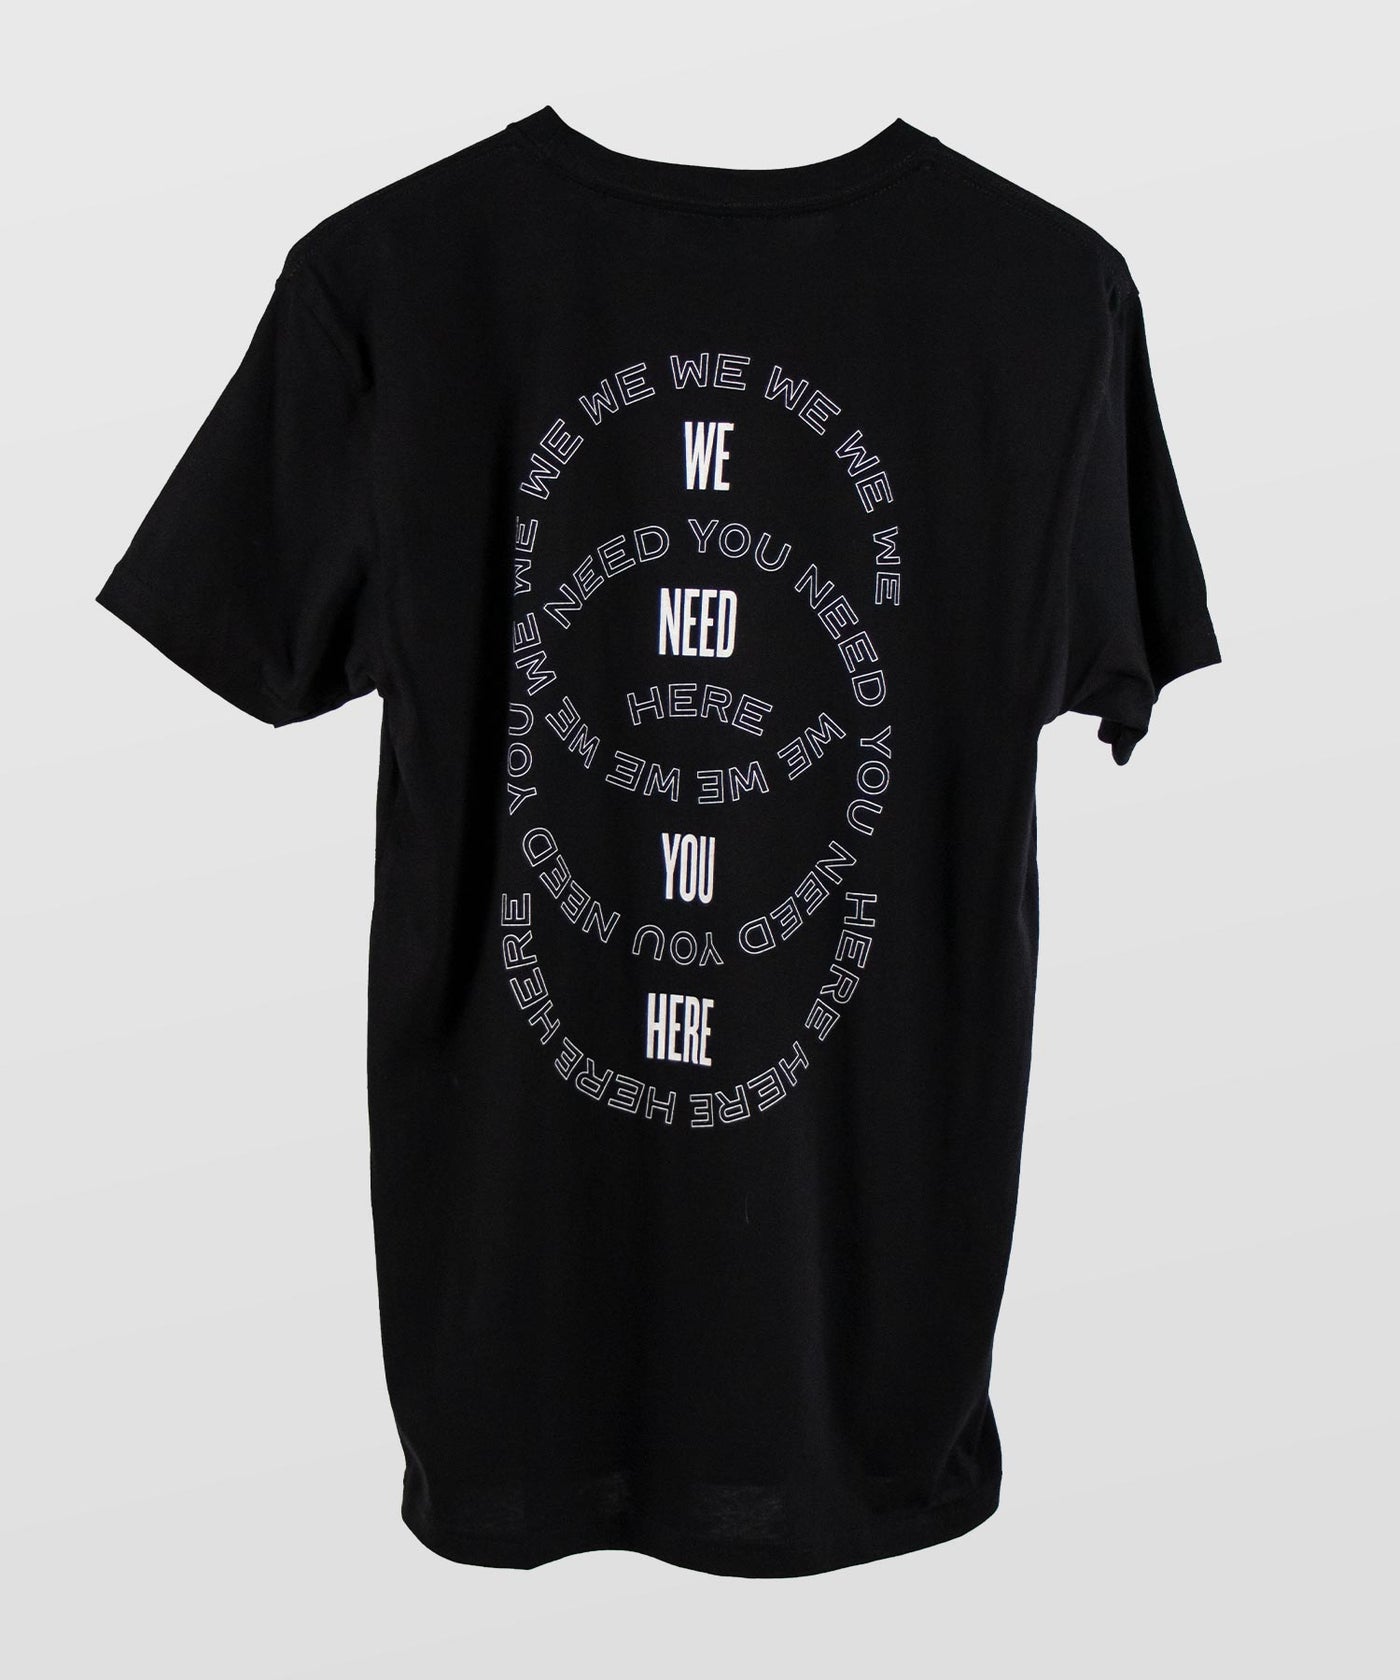 Still Need You Here Shirt